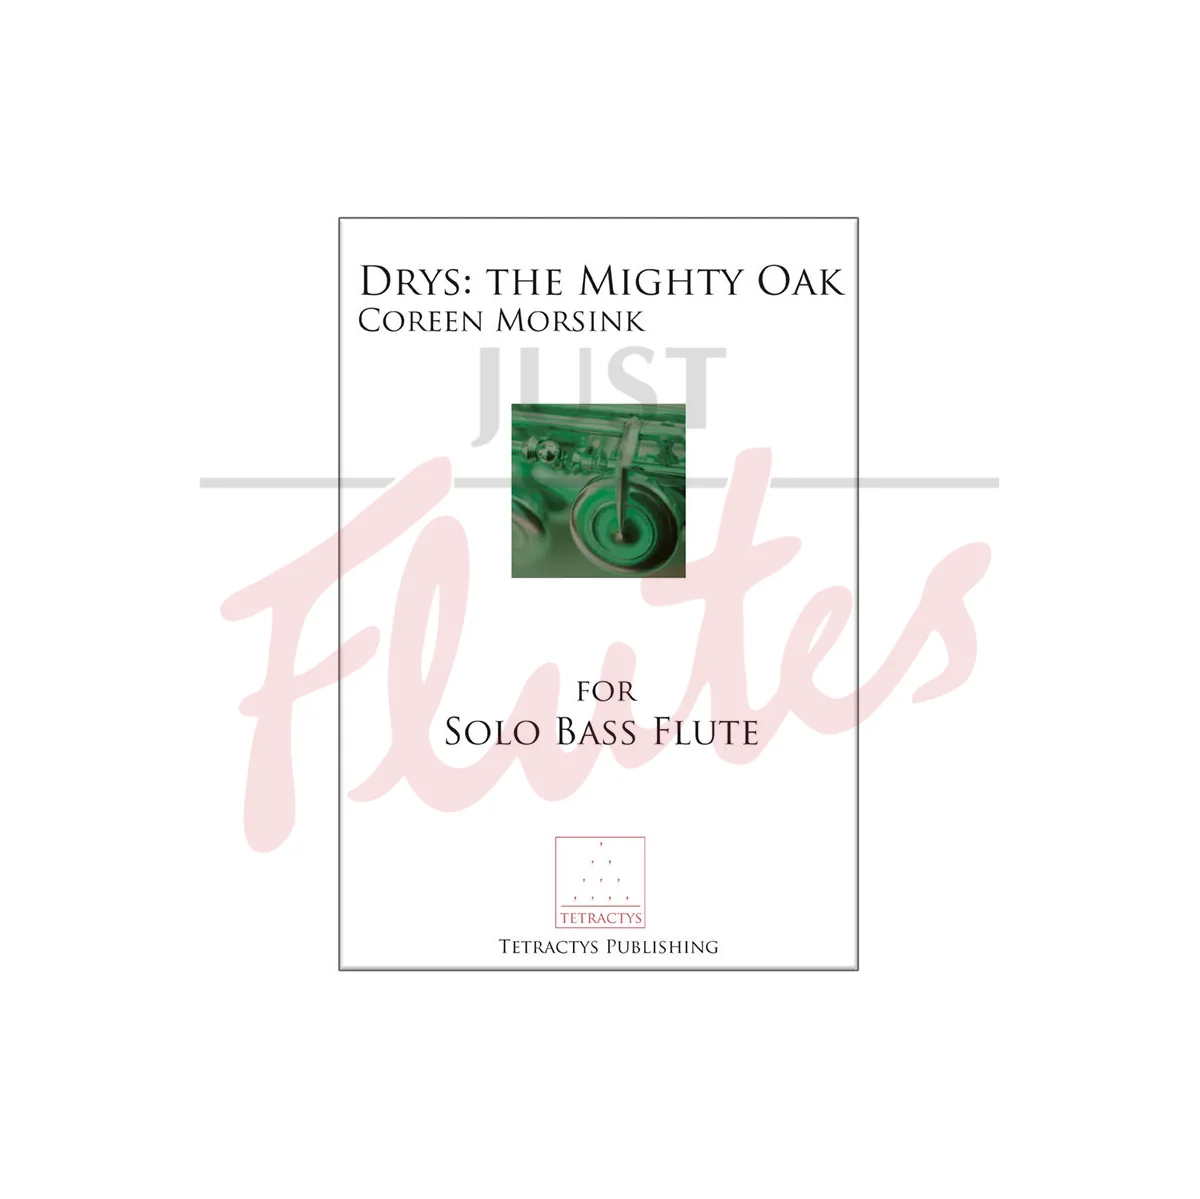 Drys: The Mighty Oak for Solo Bass Flute